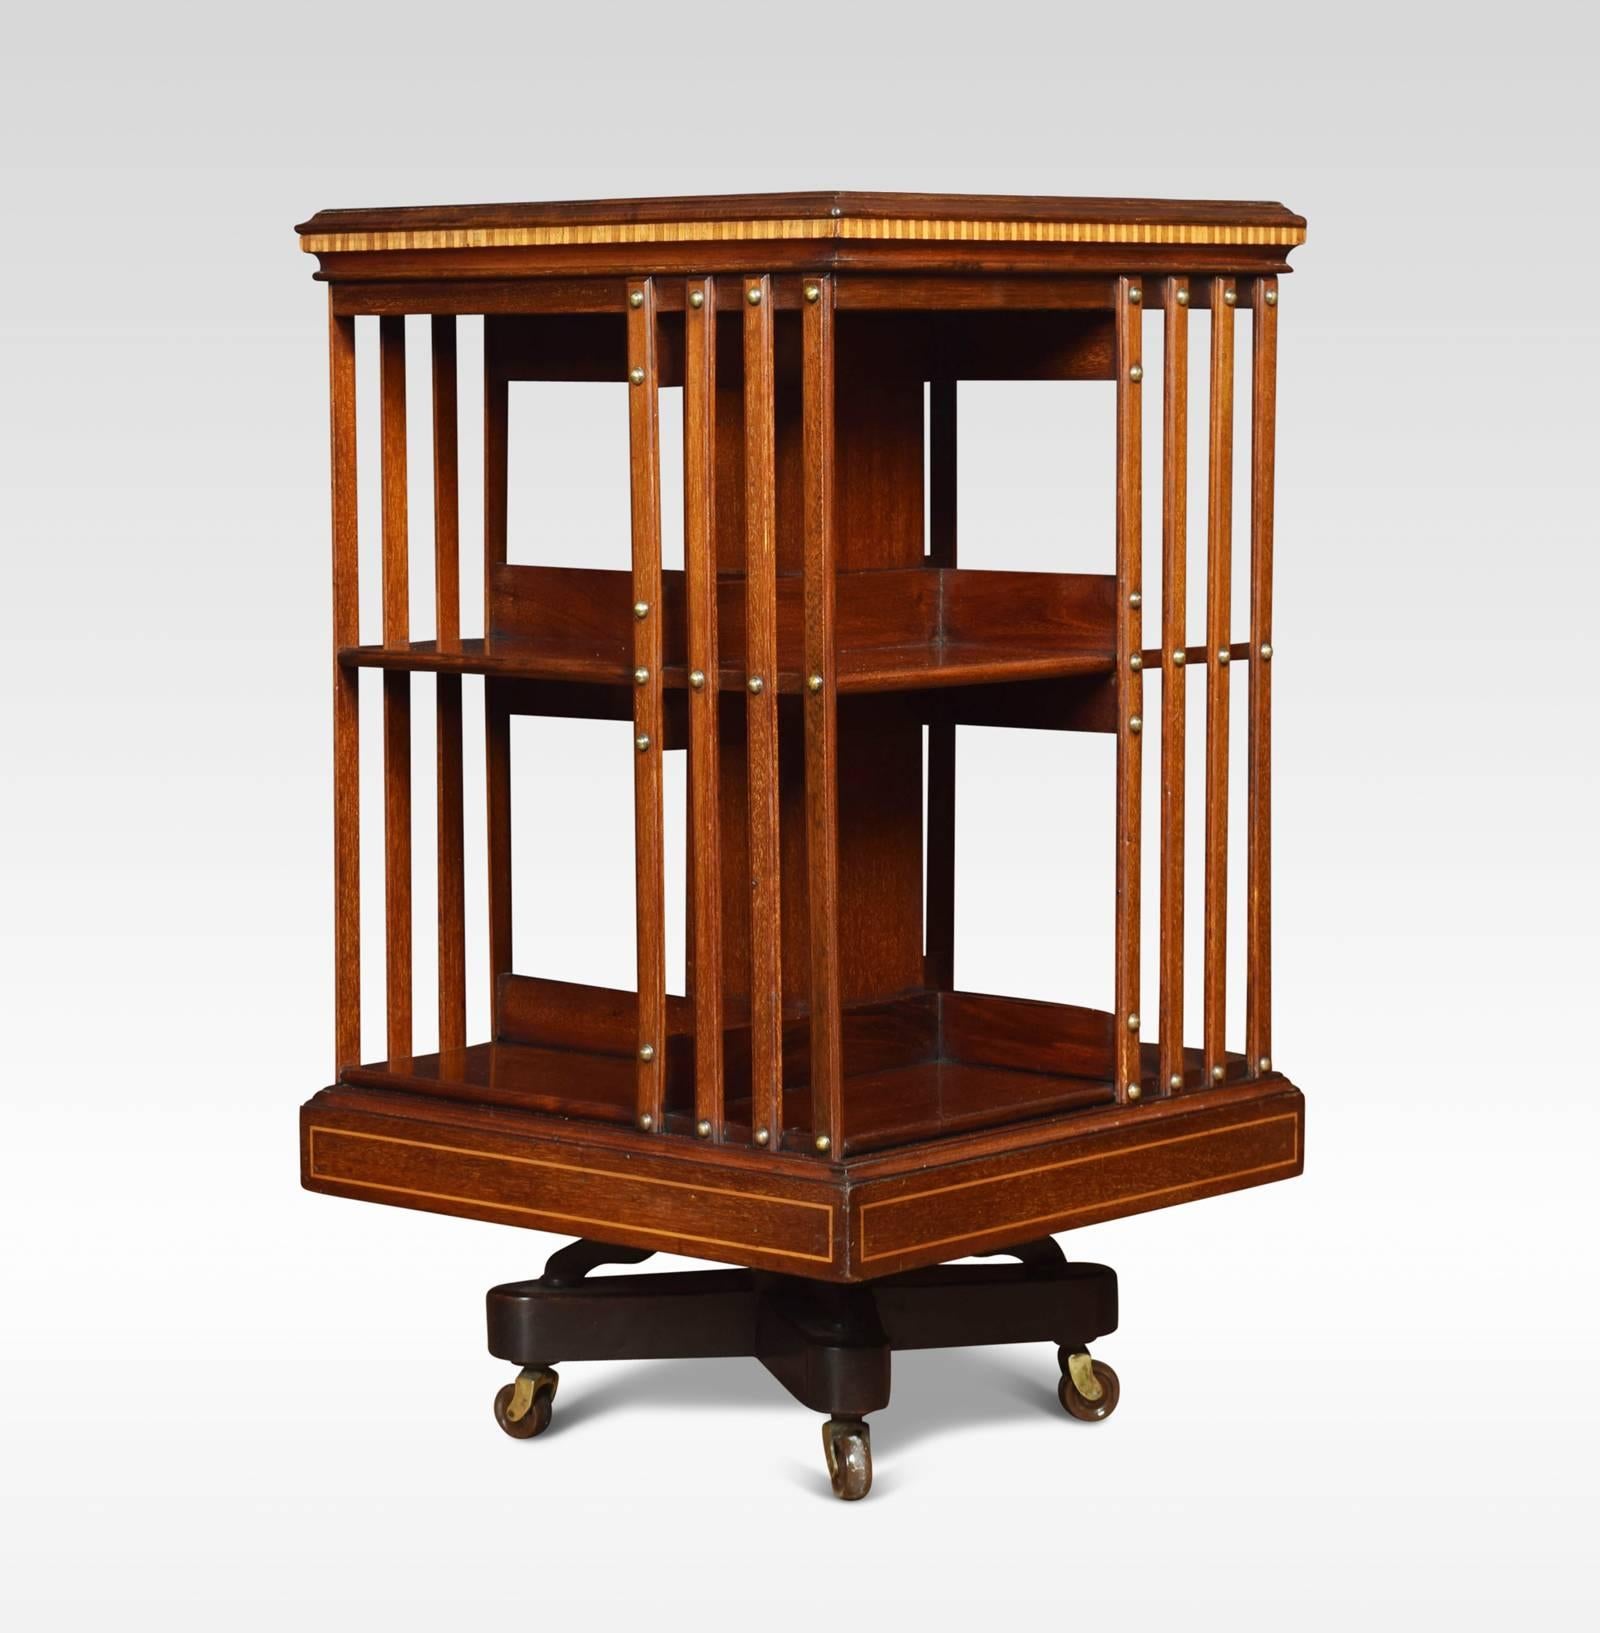 Mahogany revolving bookcase the satinwood crossbanded top with central fan inlay, above an arrangement off shelves raised up on a cruciform base with castors attributed to Maple & Co
Dimensions
Height 34.5 inches
Width 20 inches
Depth 20